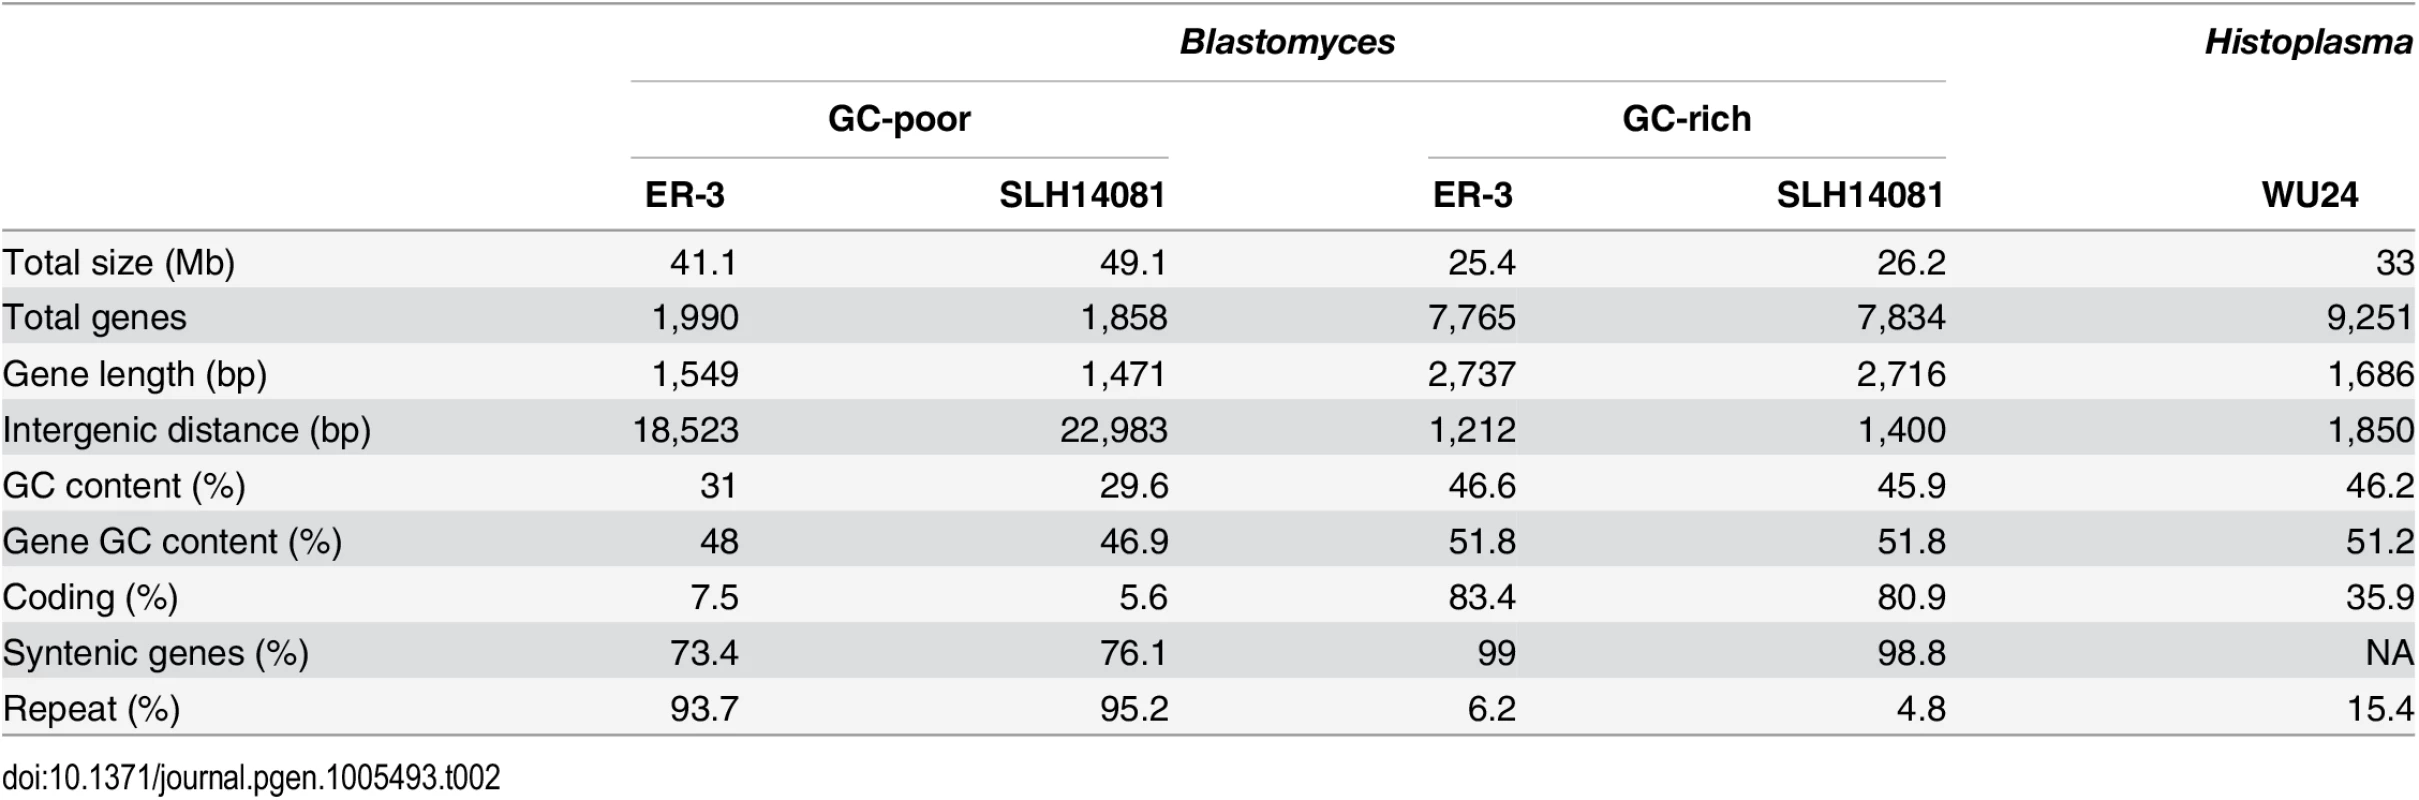 Gene and repeat features of &lt;i&gt;Blastomyces&lt;/i&gt; GC-rich and GC-poor regions compared to &lt;i&gt;Histoplasma&lt;/i&gt;.